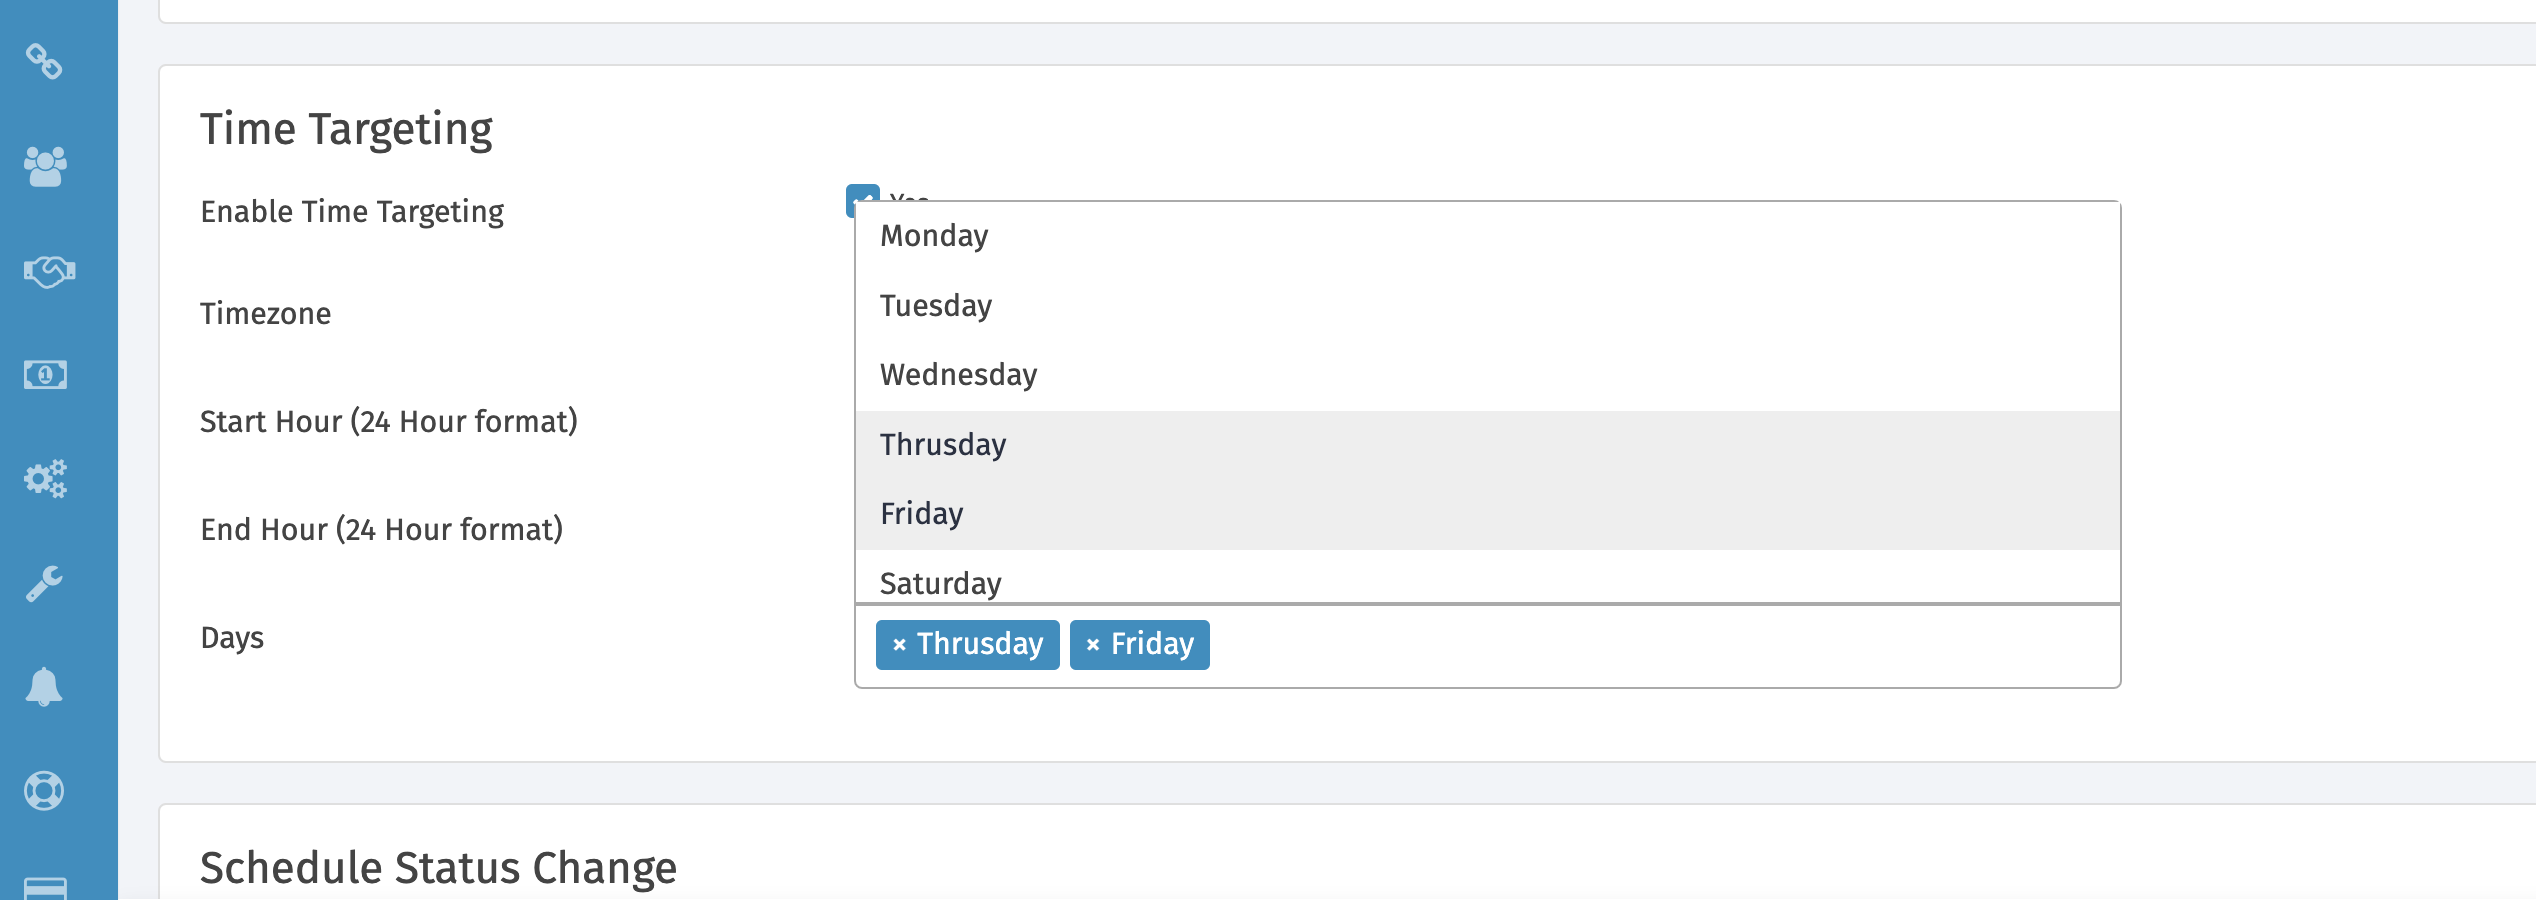 Scheduling the campaigns to run on specific weekdays